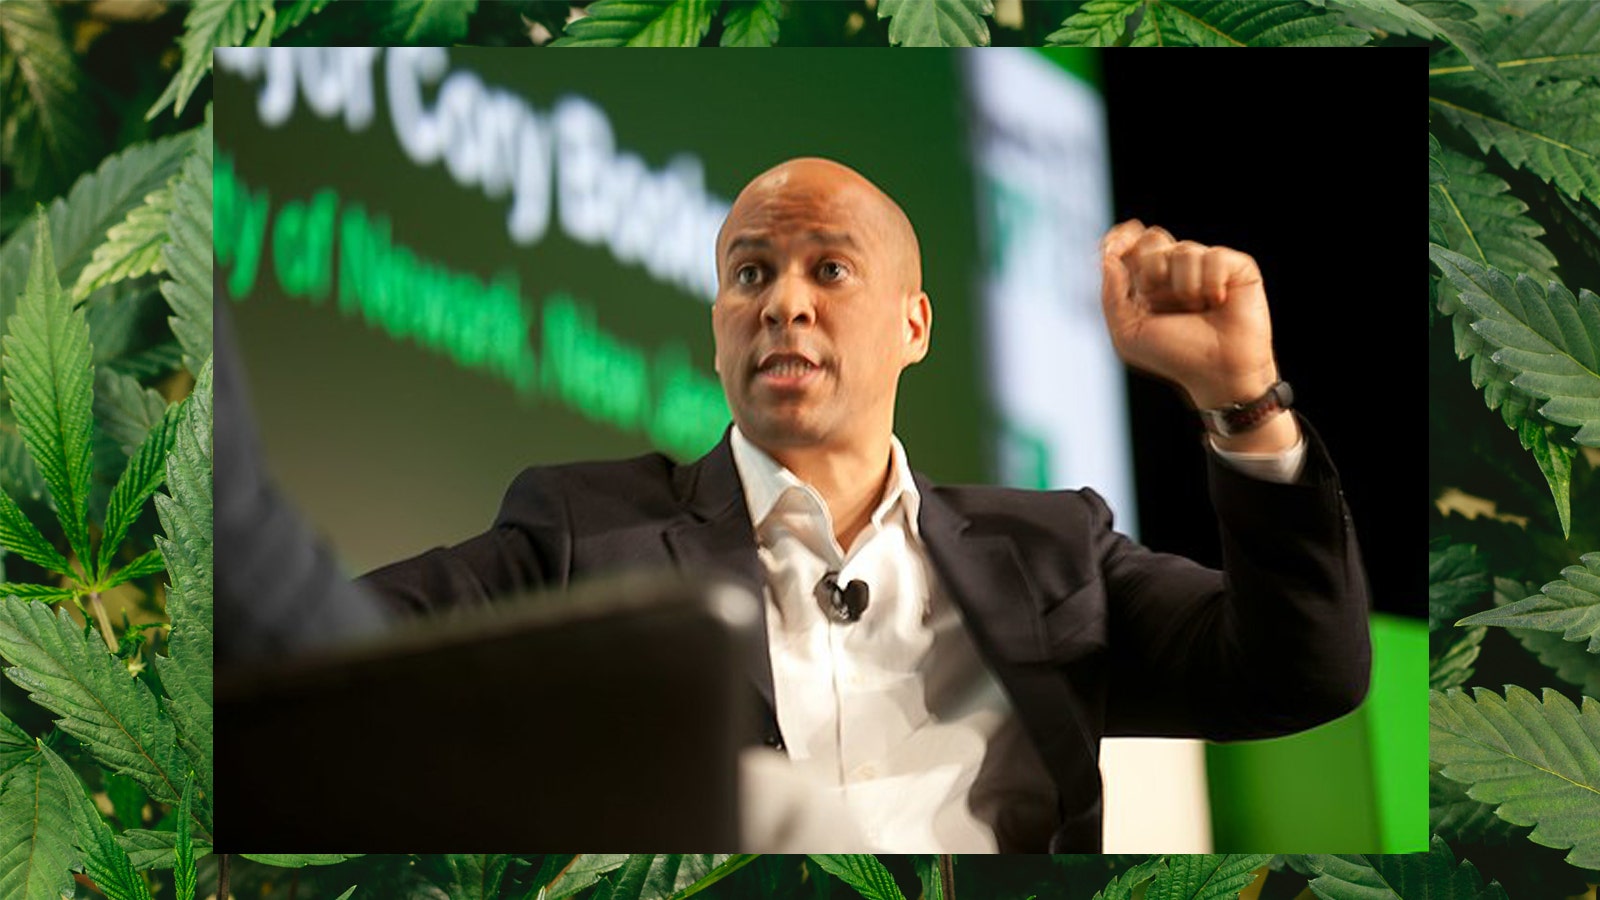 GOP House Majority Isn't Stopping Sen. Booker's Push For Cannabis Banking Reform As WH Stays Neutral